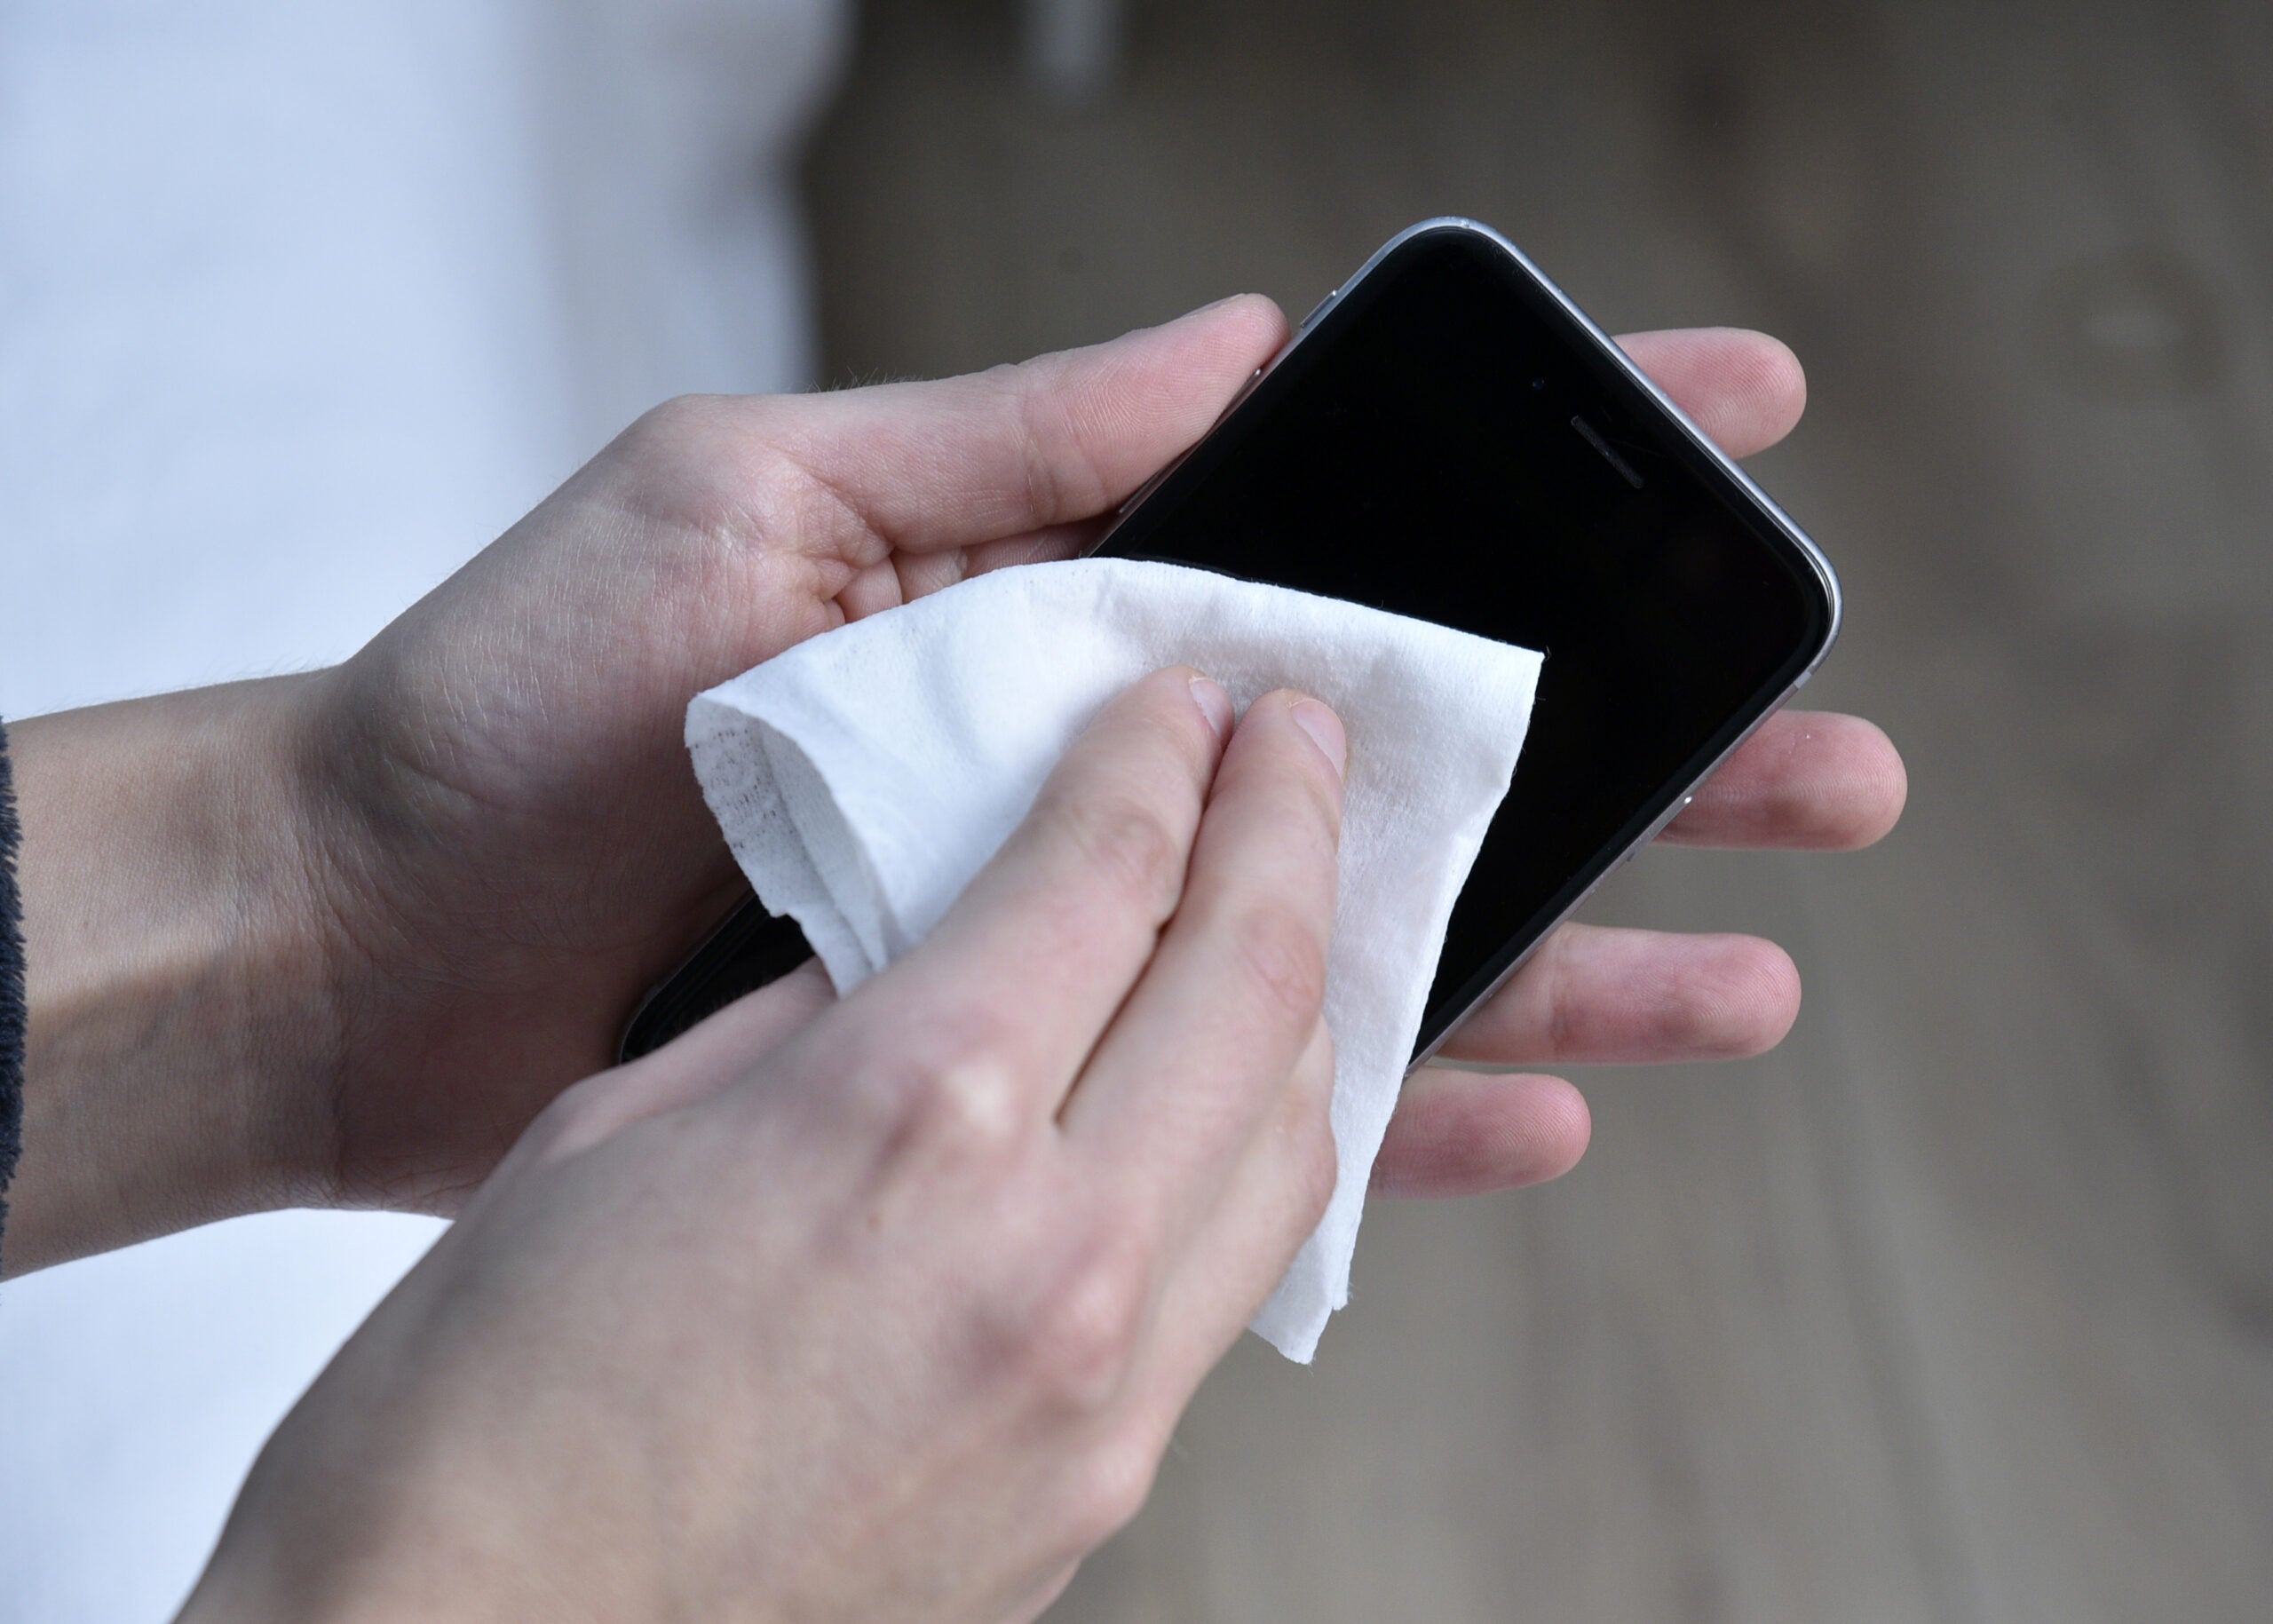 one hand holds a smart phone while another wipes the phone's face with a cloth